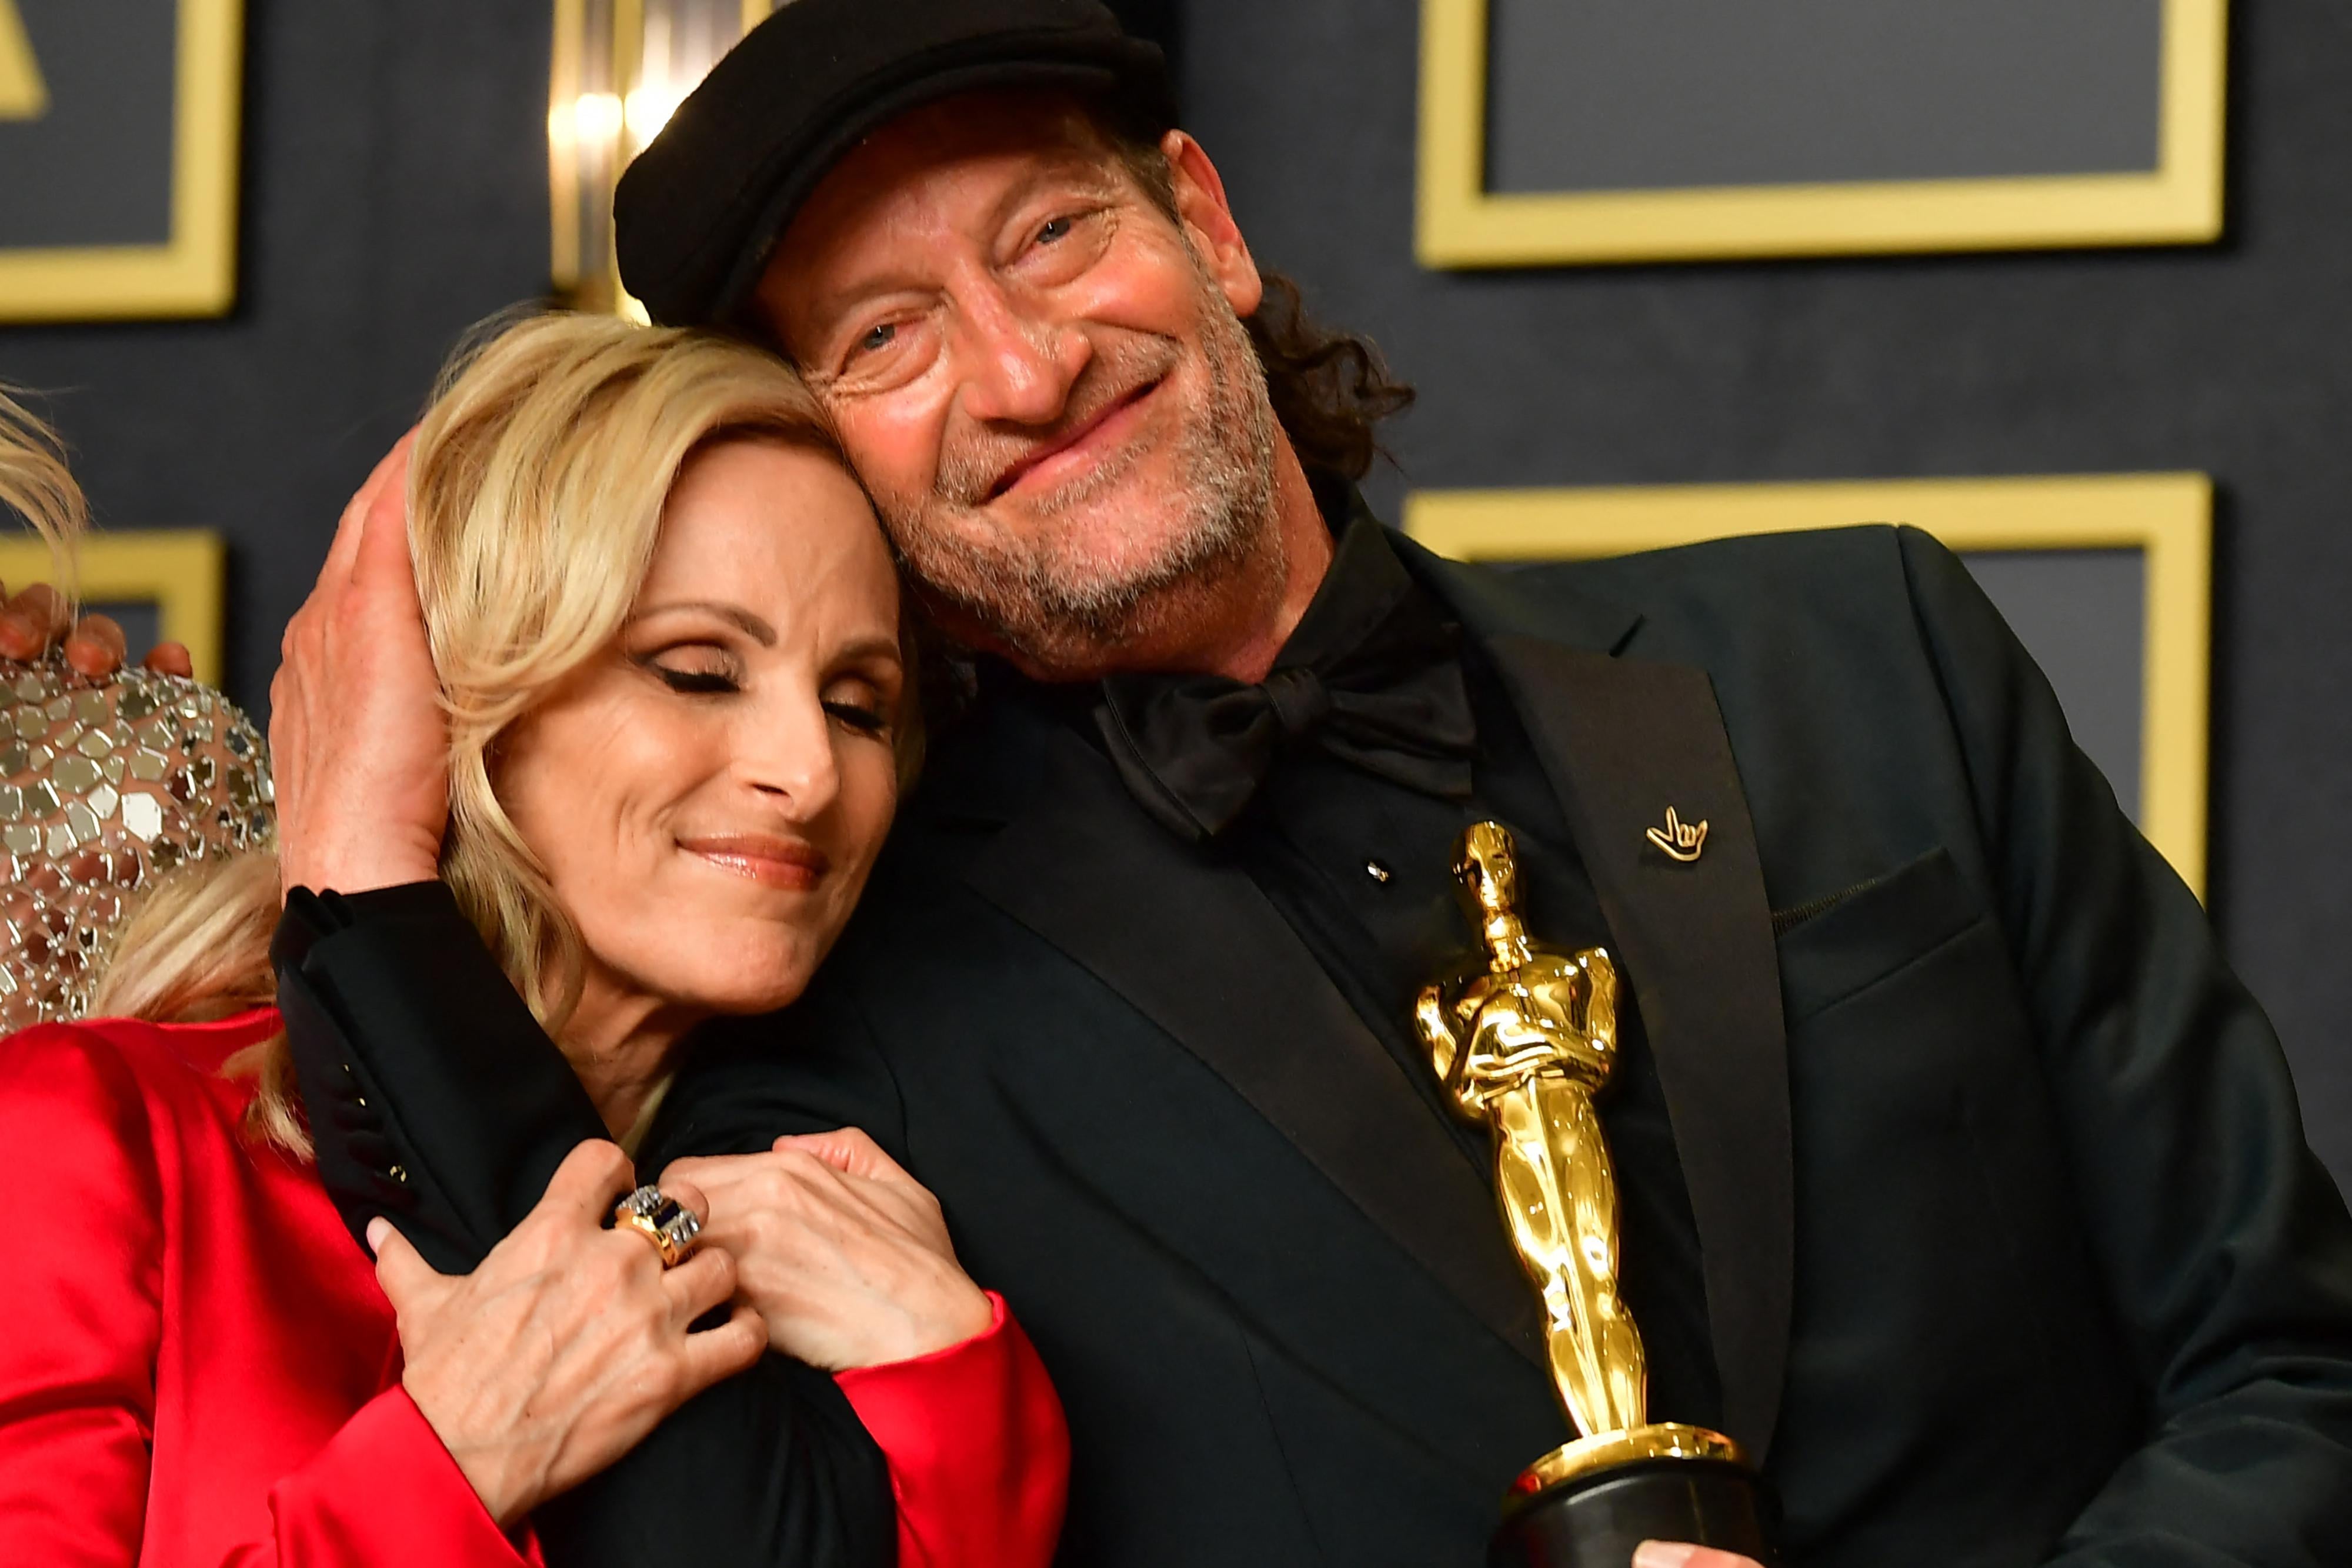 Troy Kotsur smiles at the camera as he holds up his Oscar statuette and embraces Marlee Matlin, who smiles and leans on his shoulder.